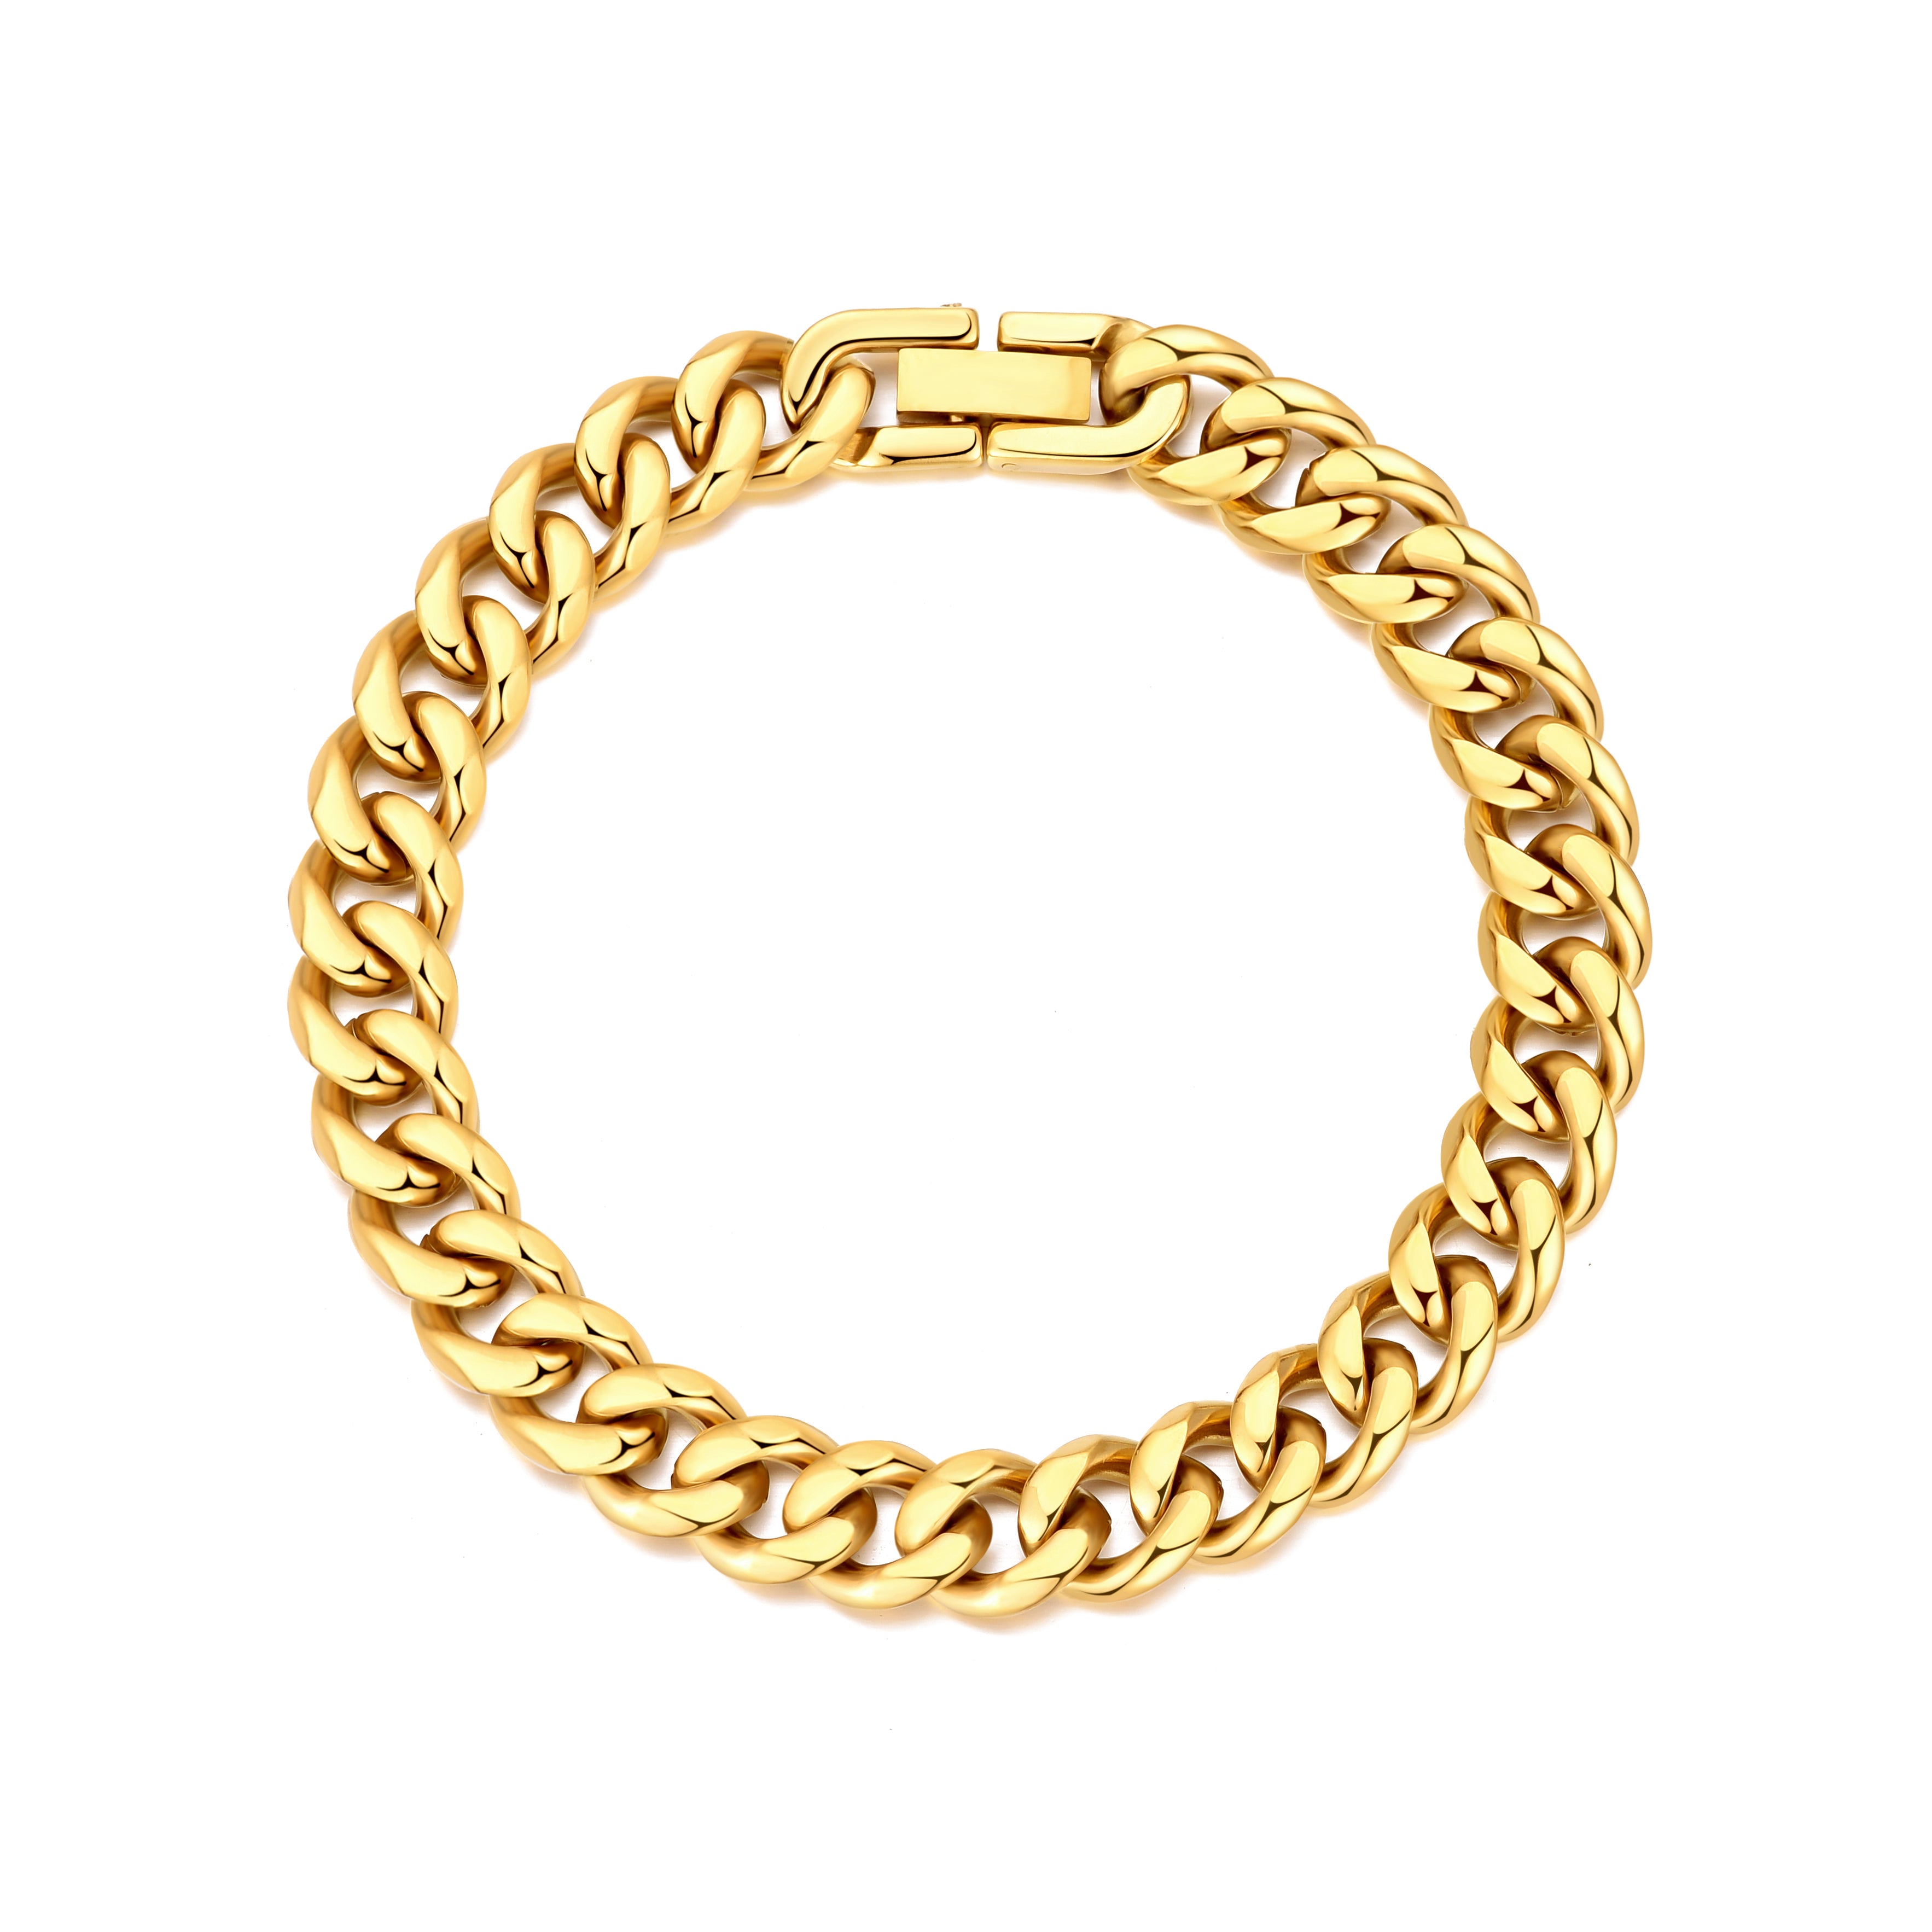 Men's 9mm Gold Plated Stainless Steel 7.5-8.5 Inch Curb Chain Bracelet by Philip Jones Jewellery